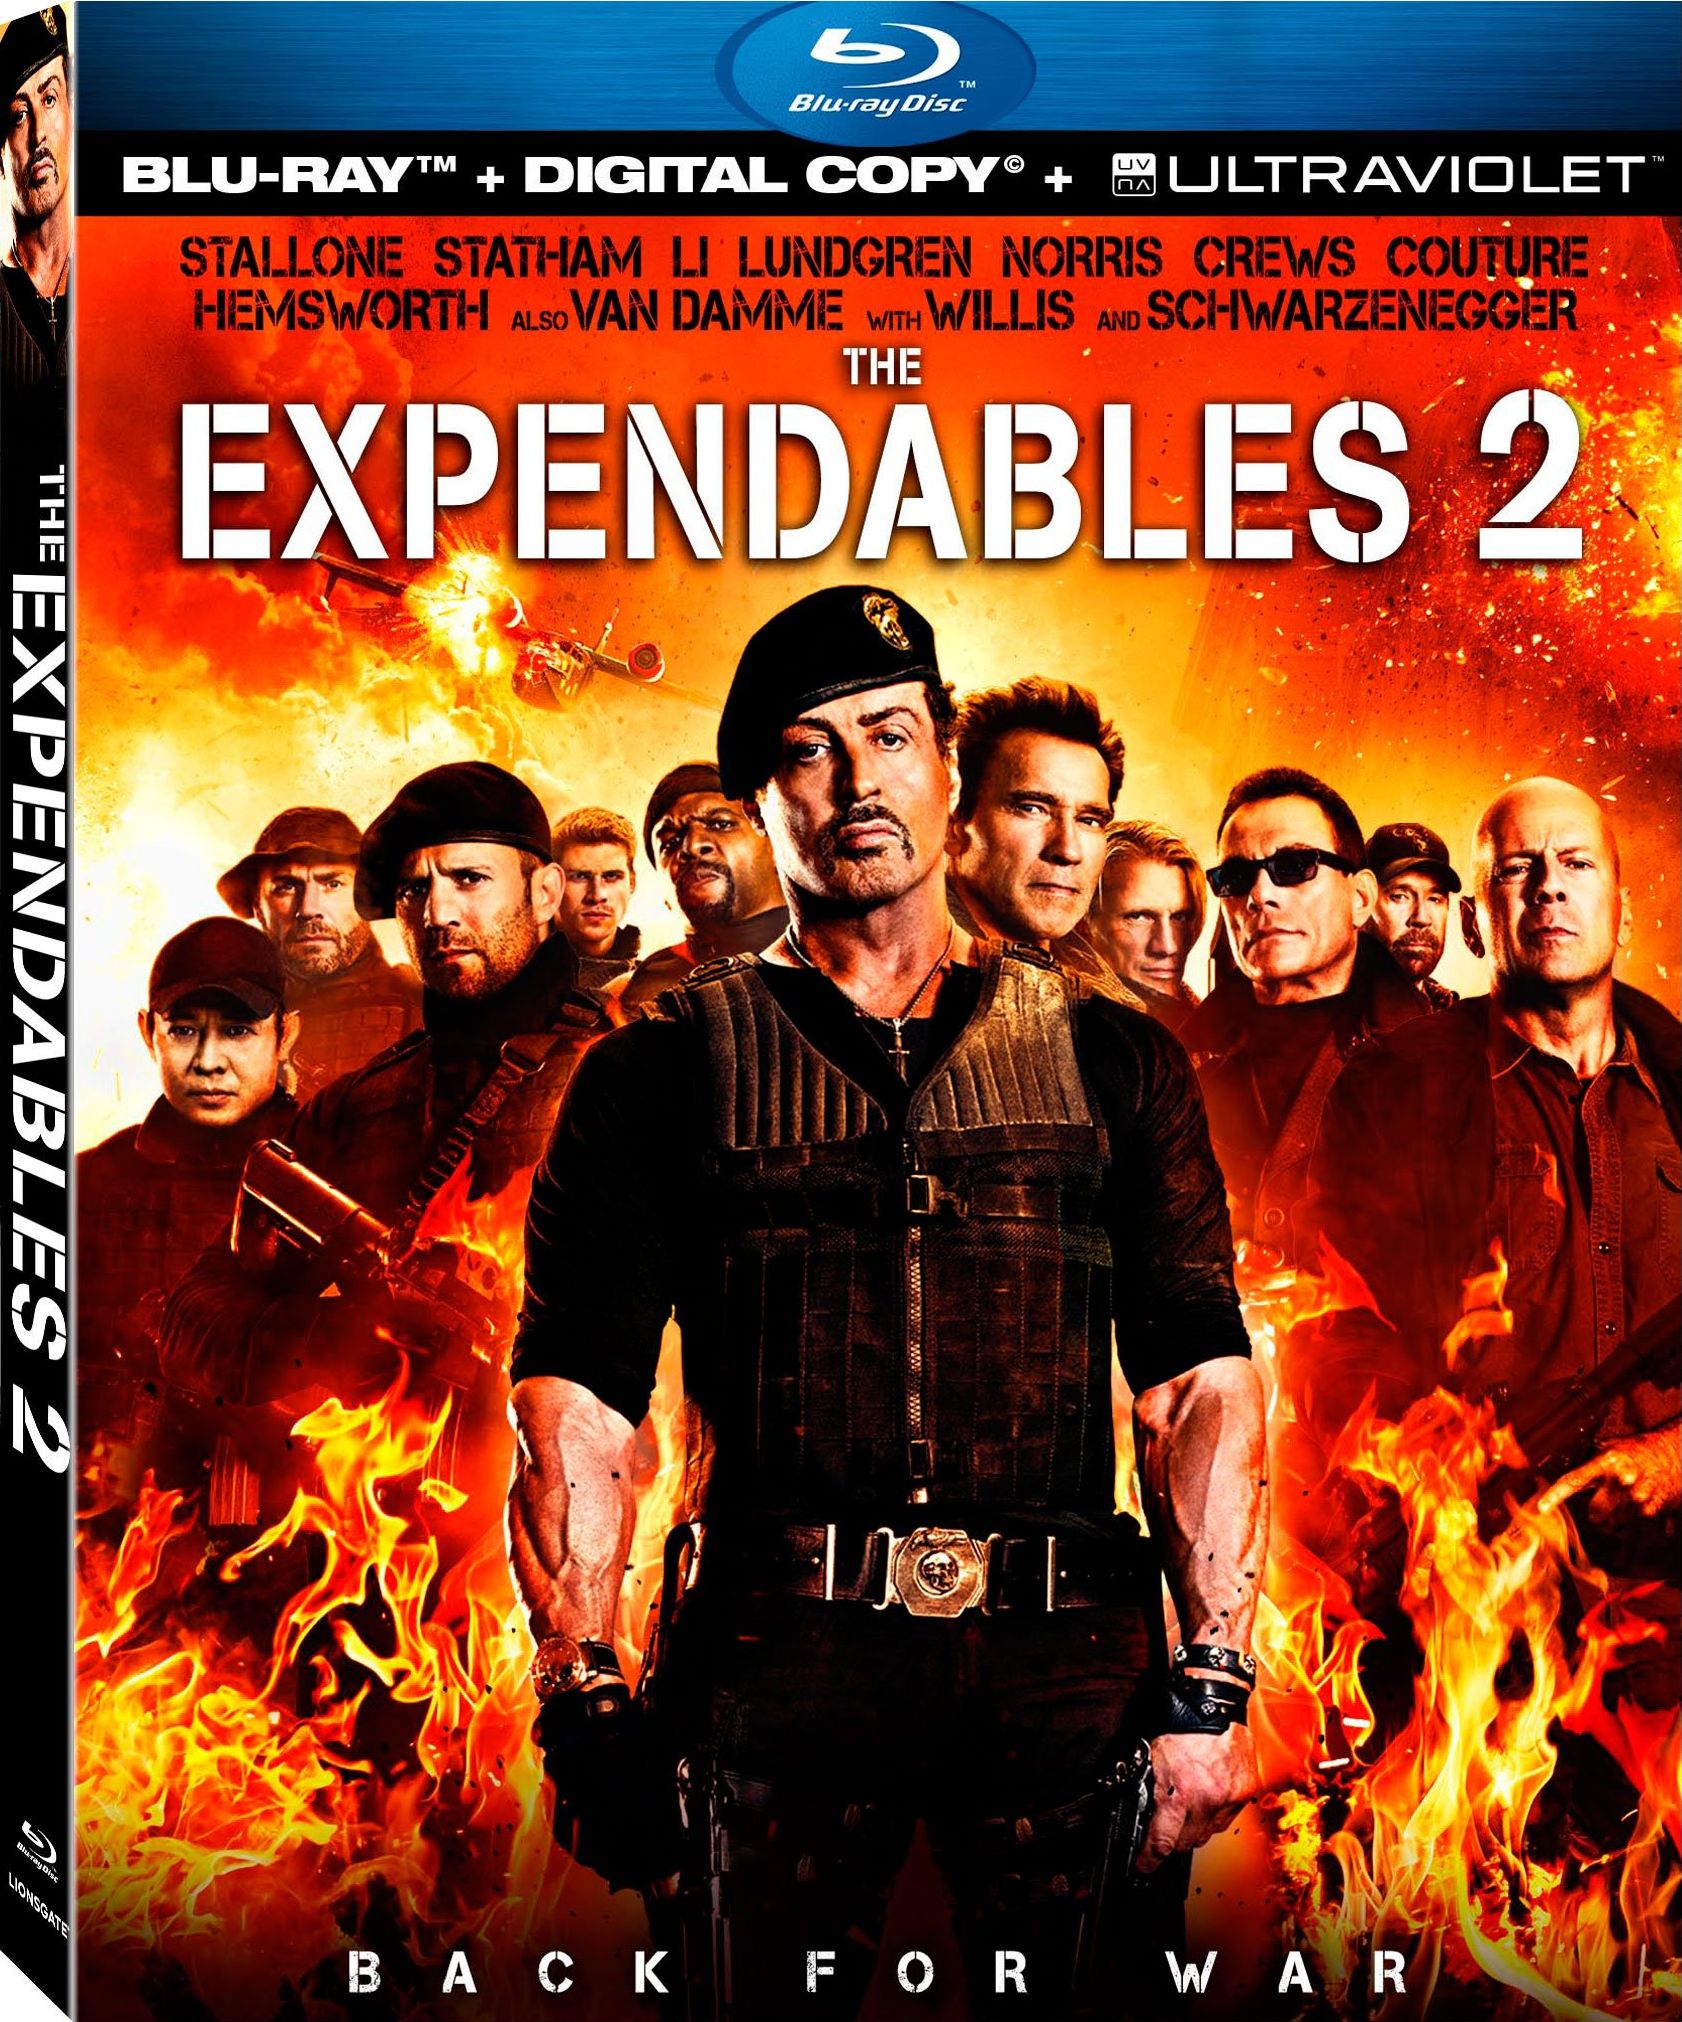 Amazing The Expendables 2 Pictures & Backgrounds